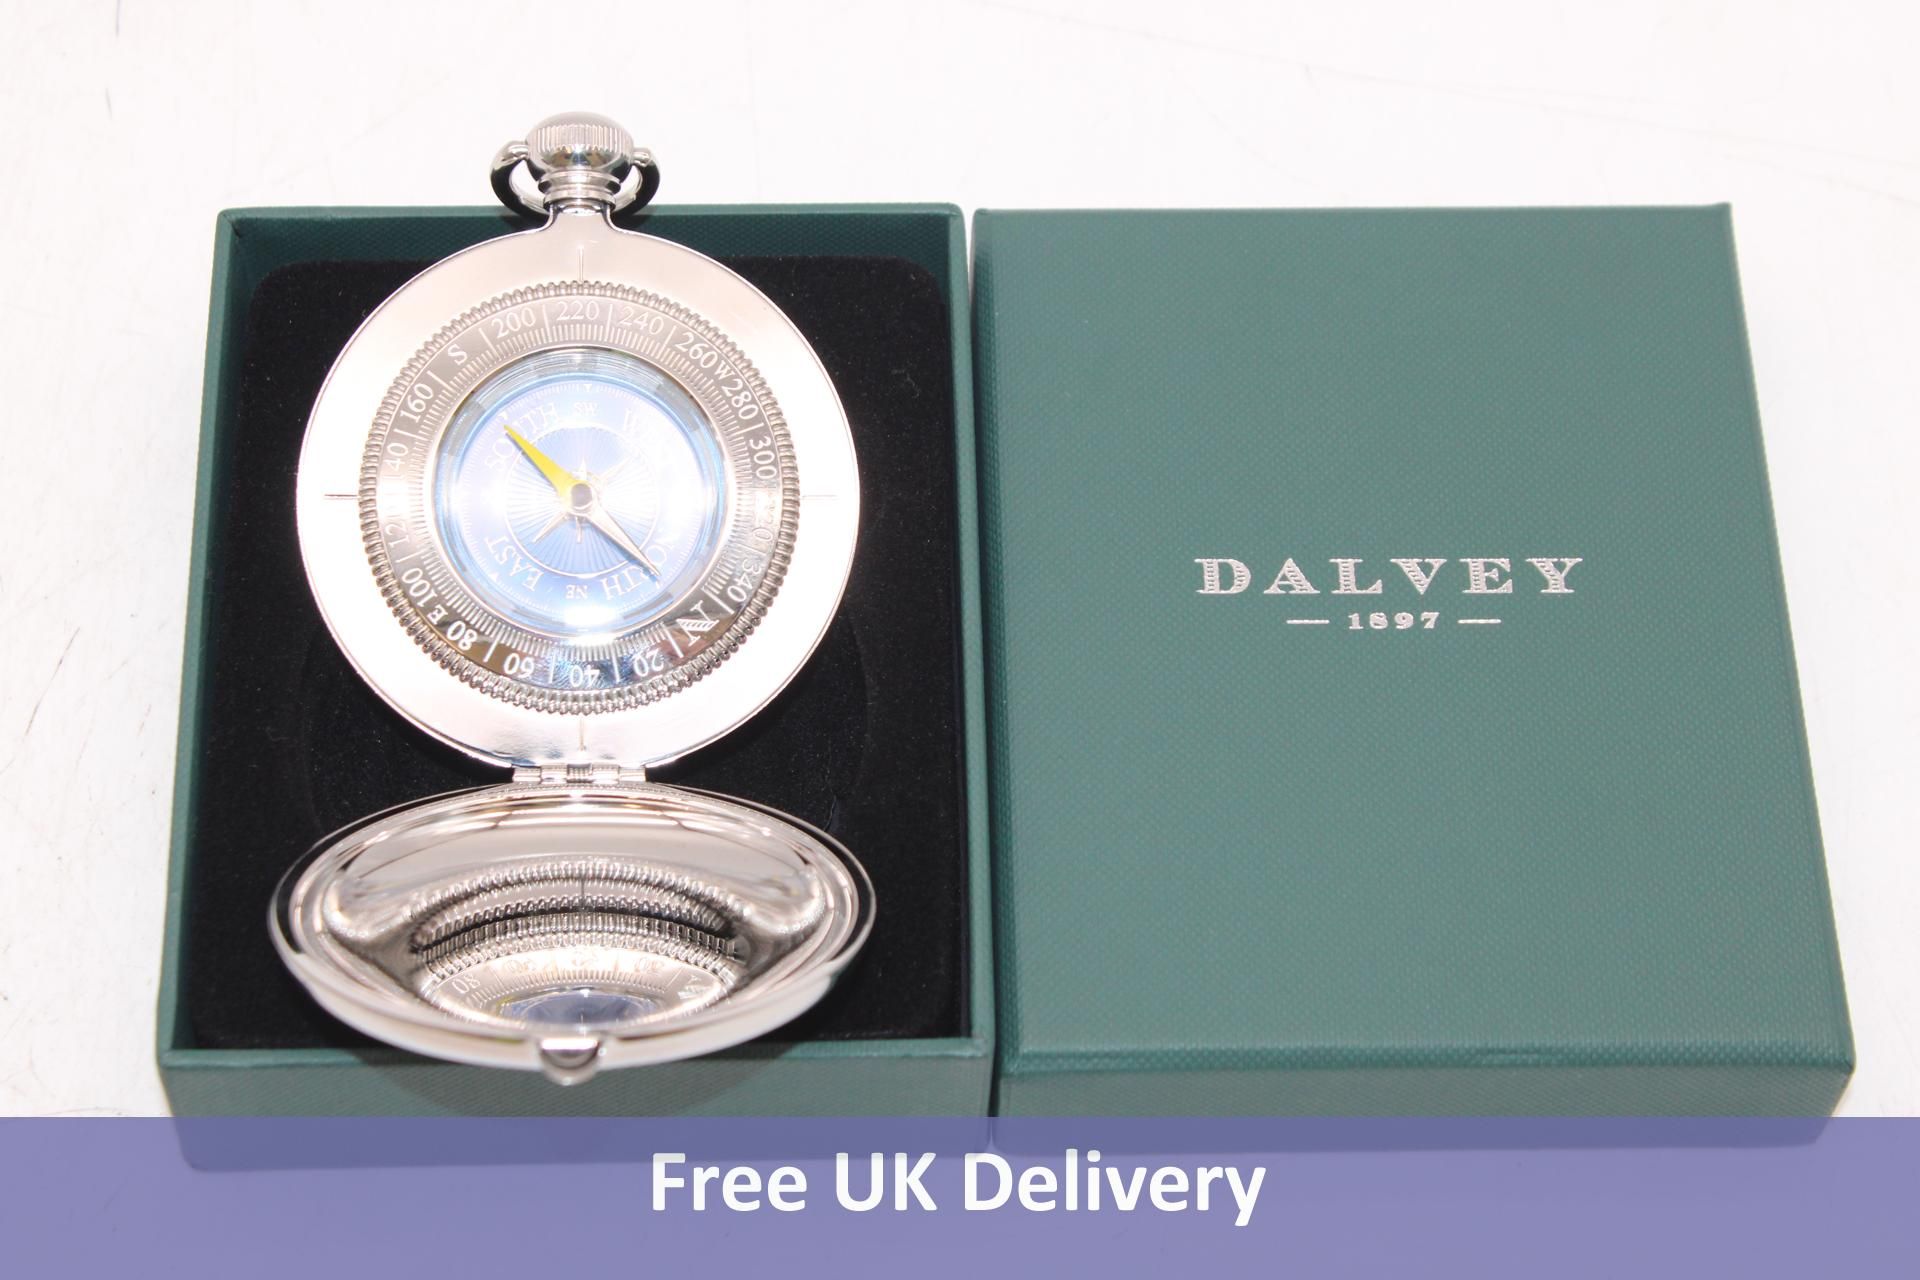 Dalvey Blue Mother of Pearl Voyager Compass, Silver